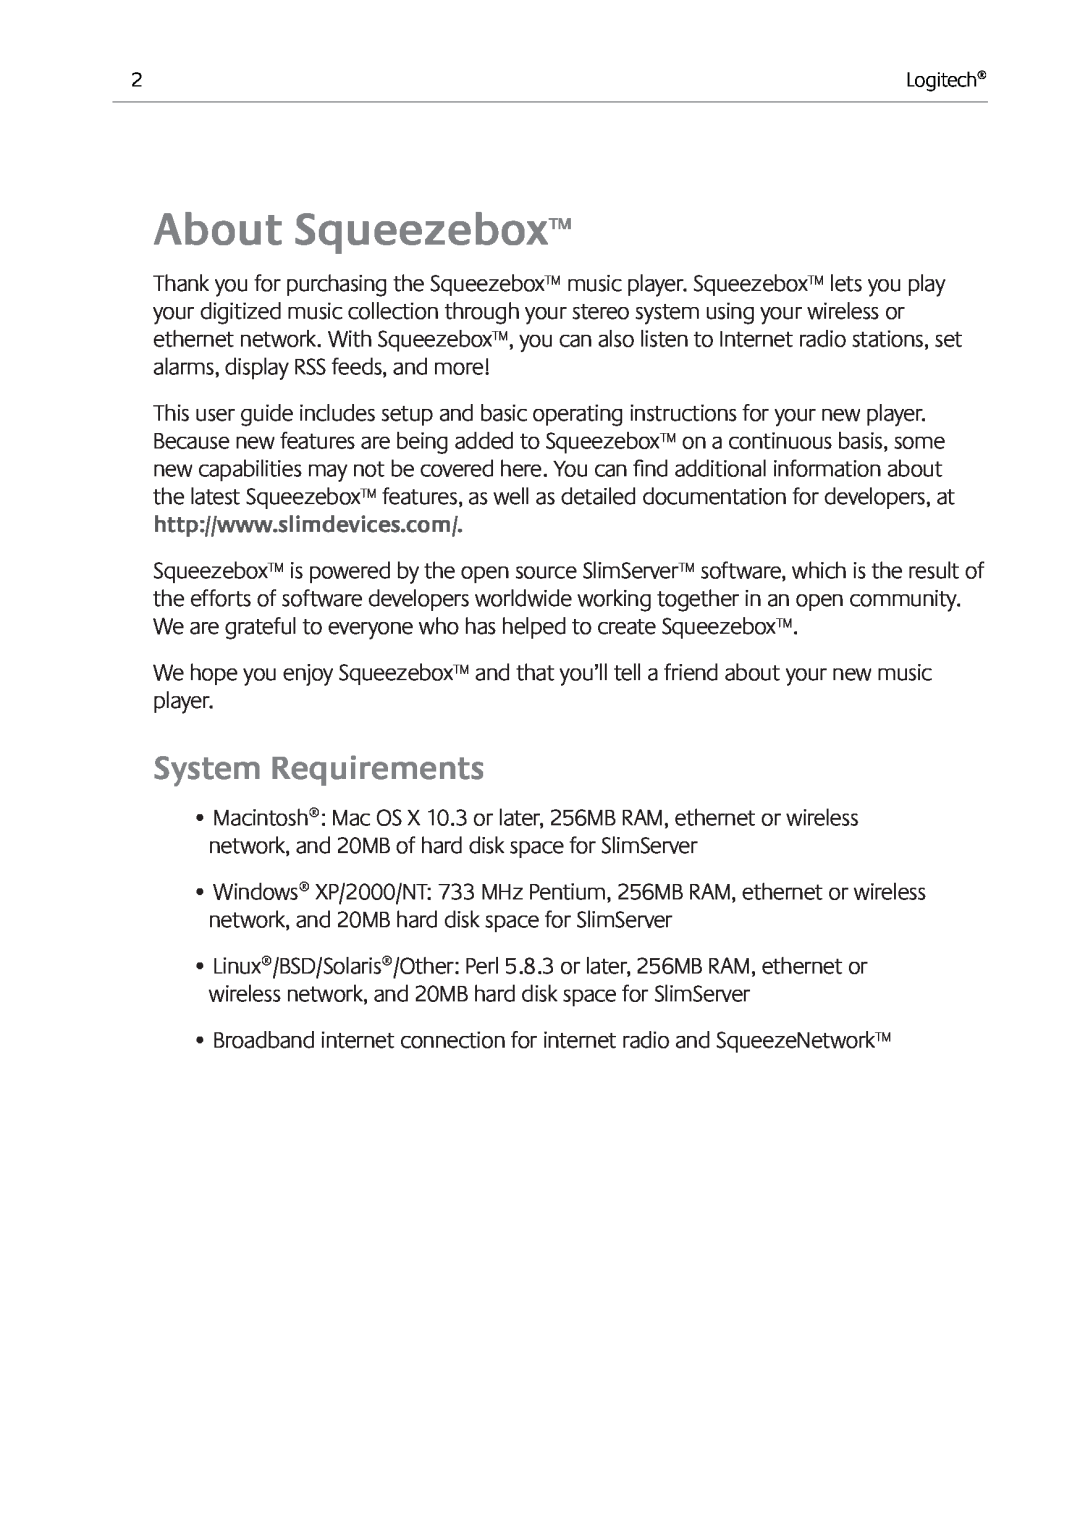 Logitech Ft manual About Squeezebox, System Requirements 